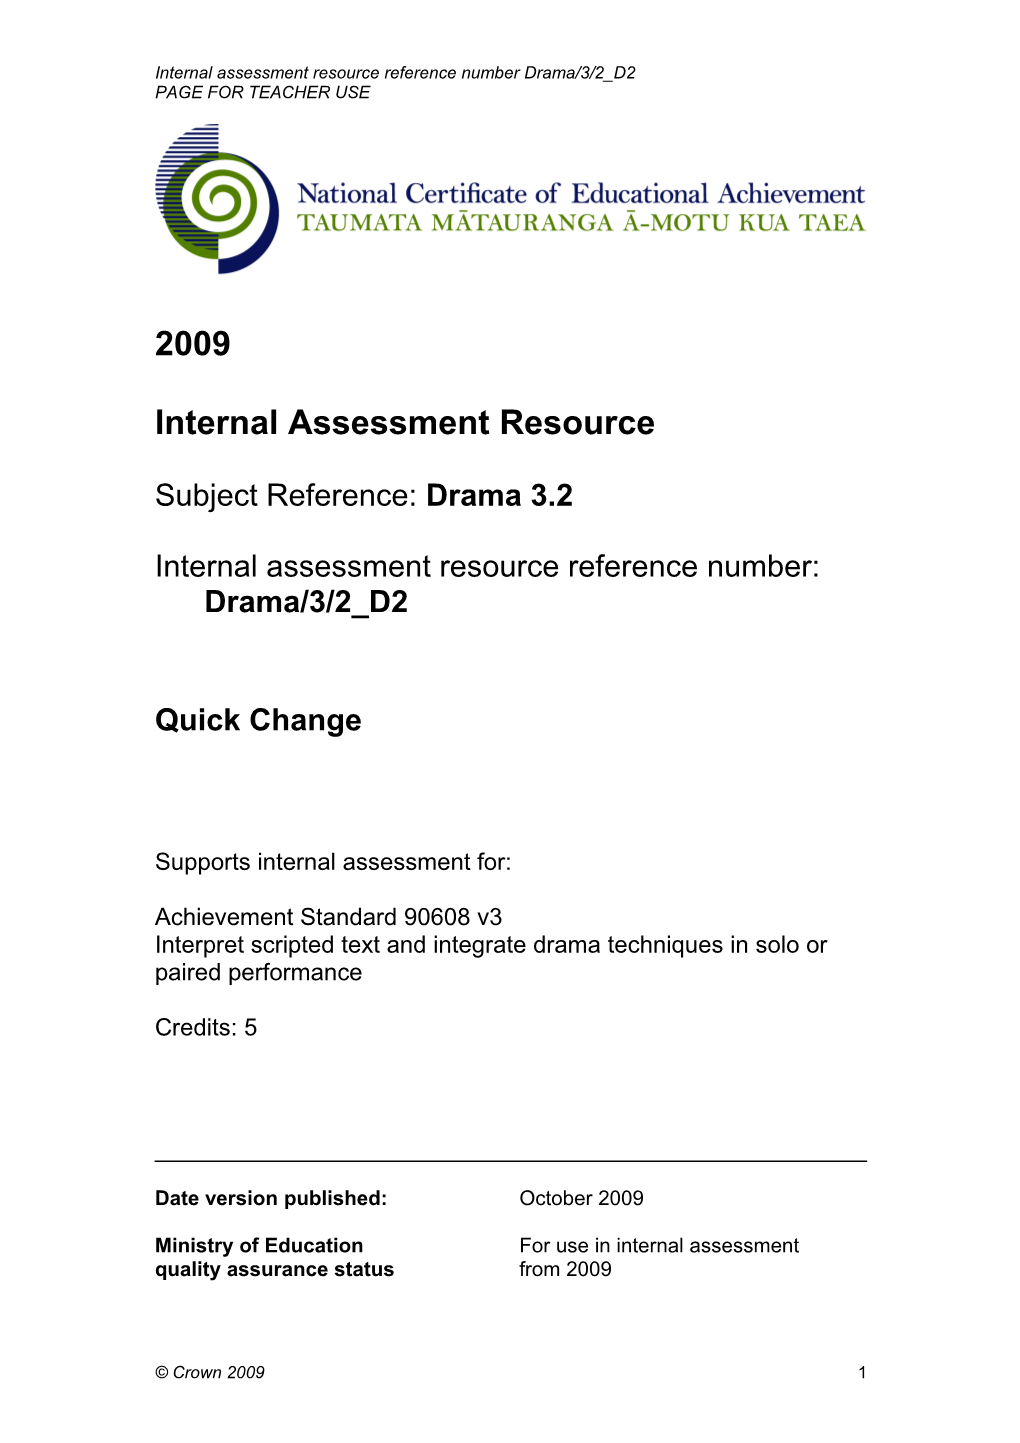 Internal Assessment Resource Reference Number Drama/3/2 D2